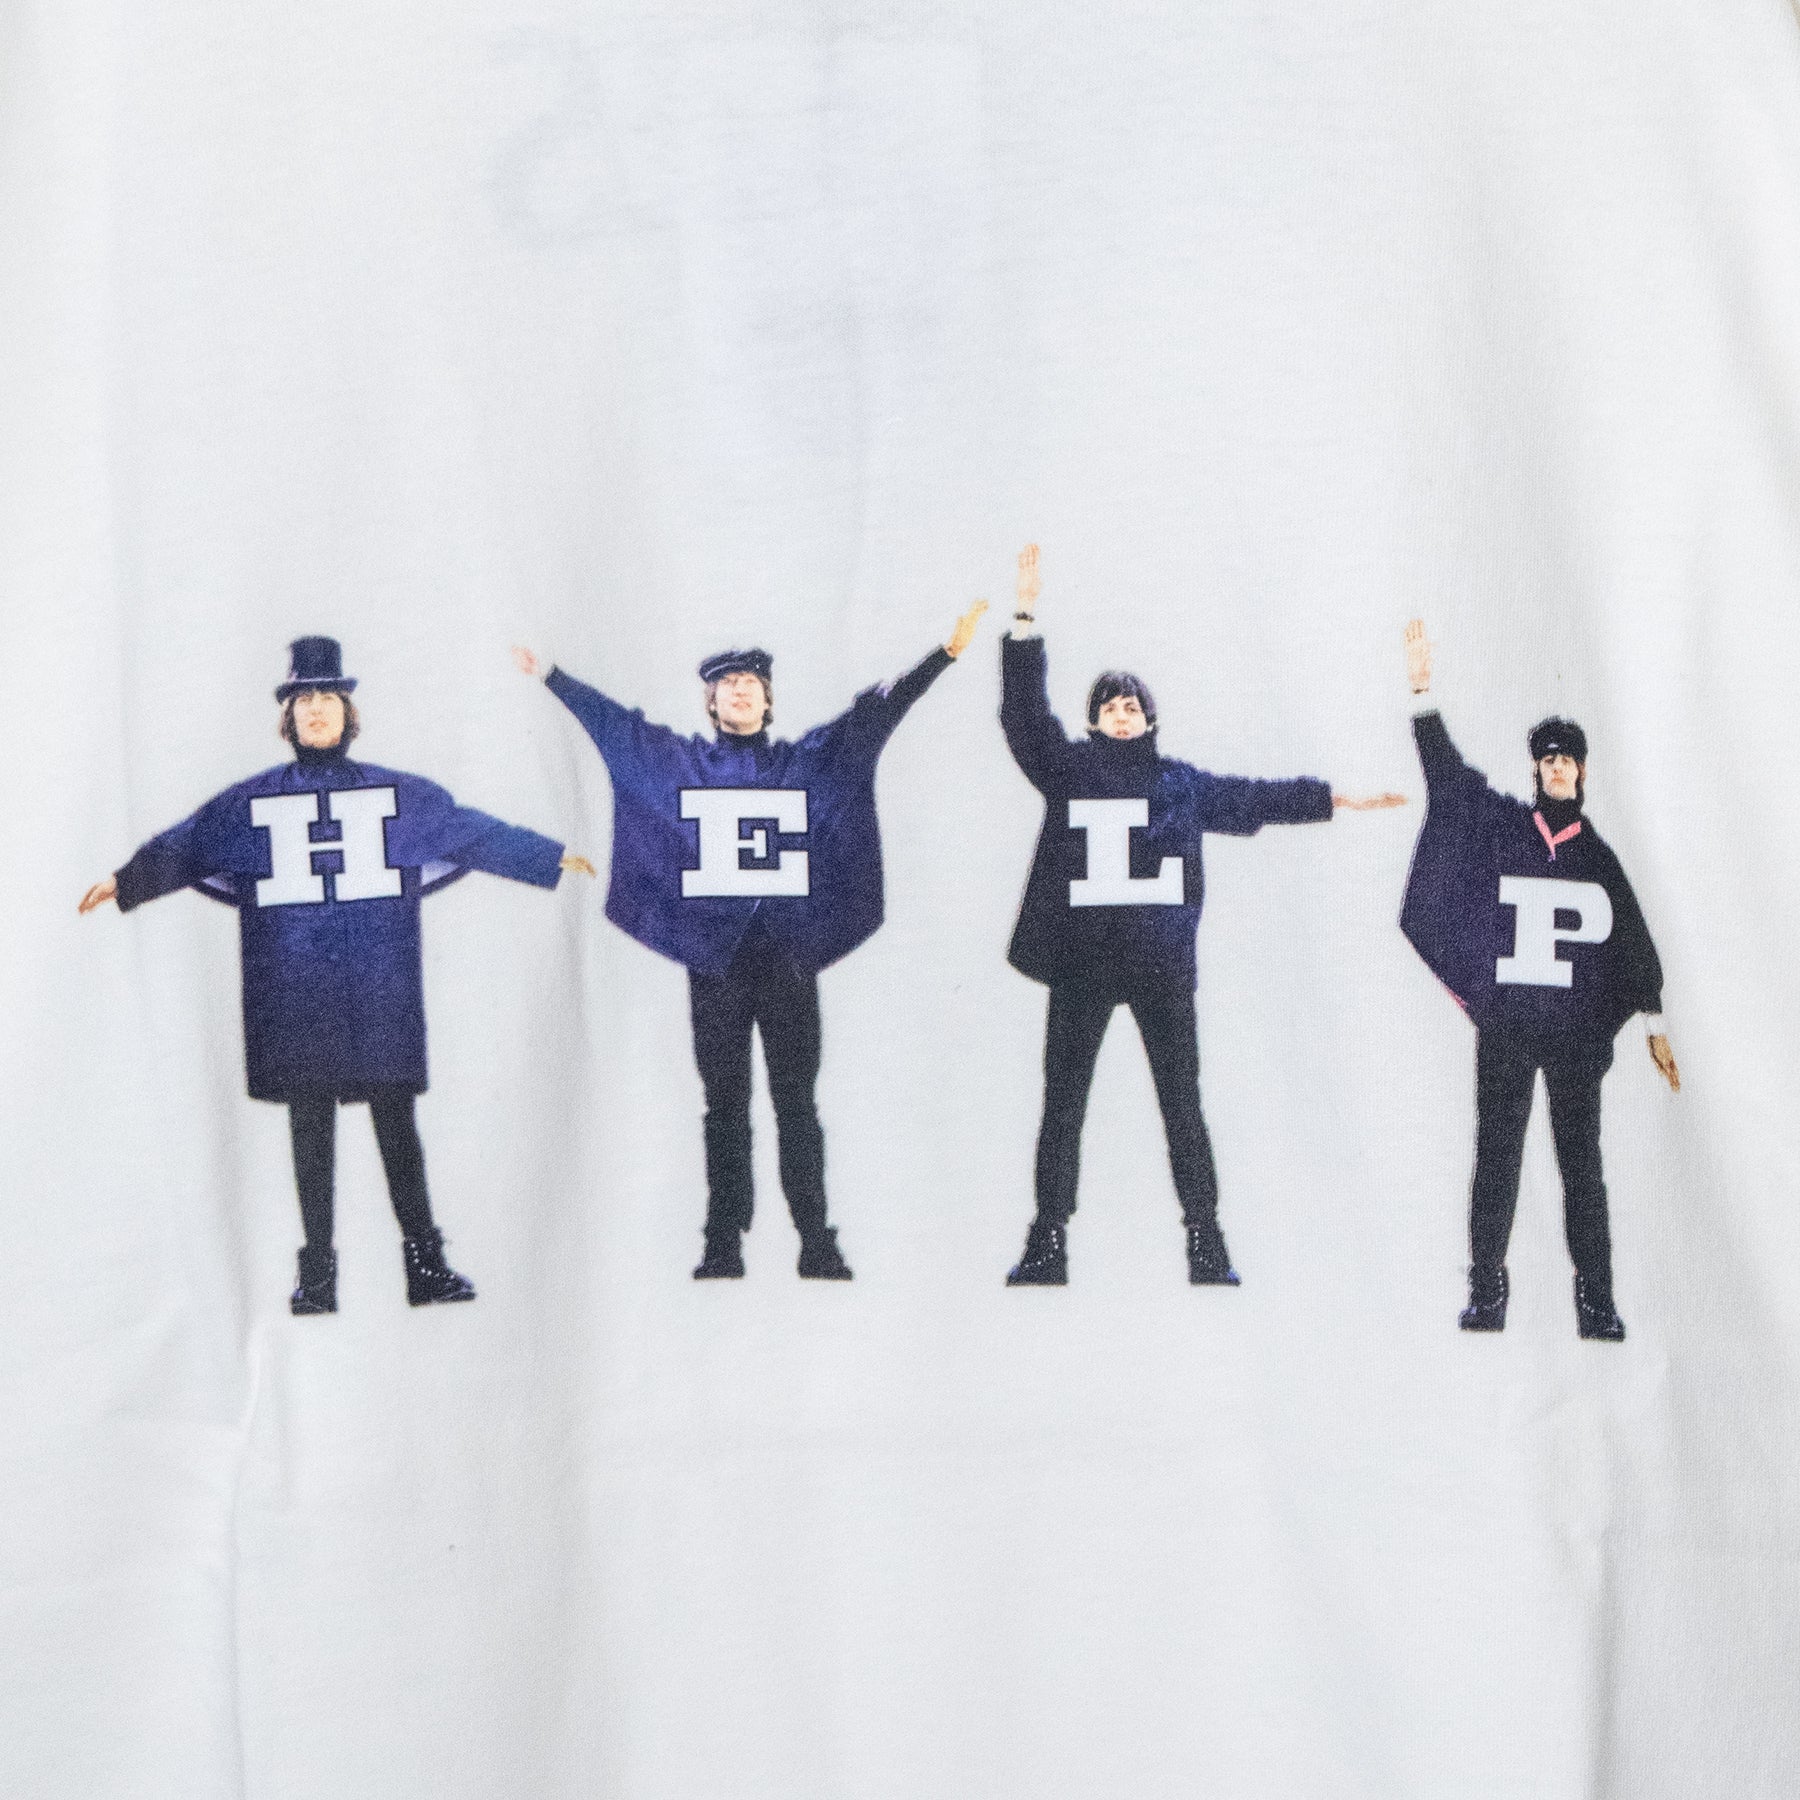 THE BEATLES HELP S/S T-shirt (2 color) - YOUAREMYPOISON